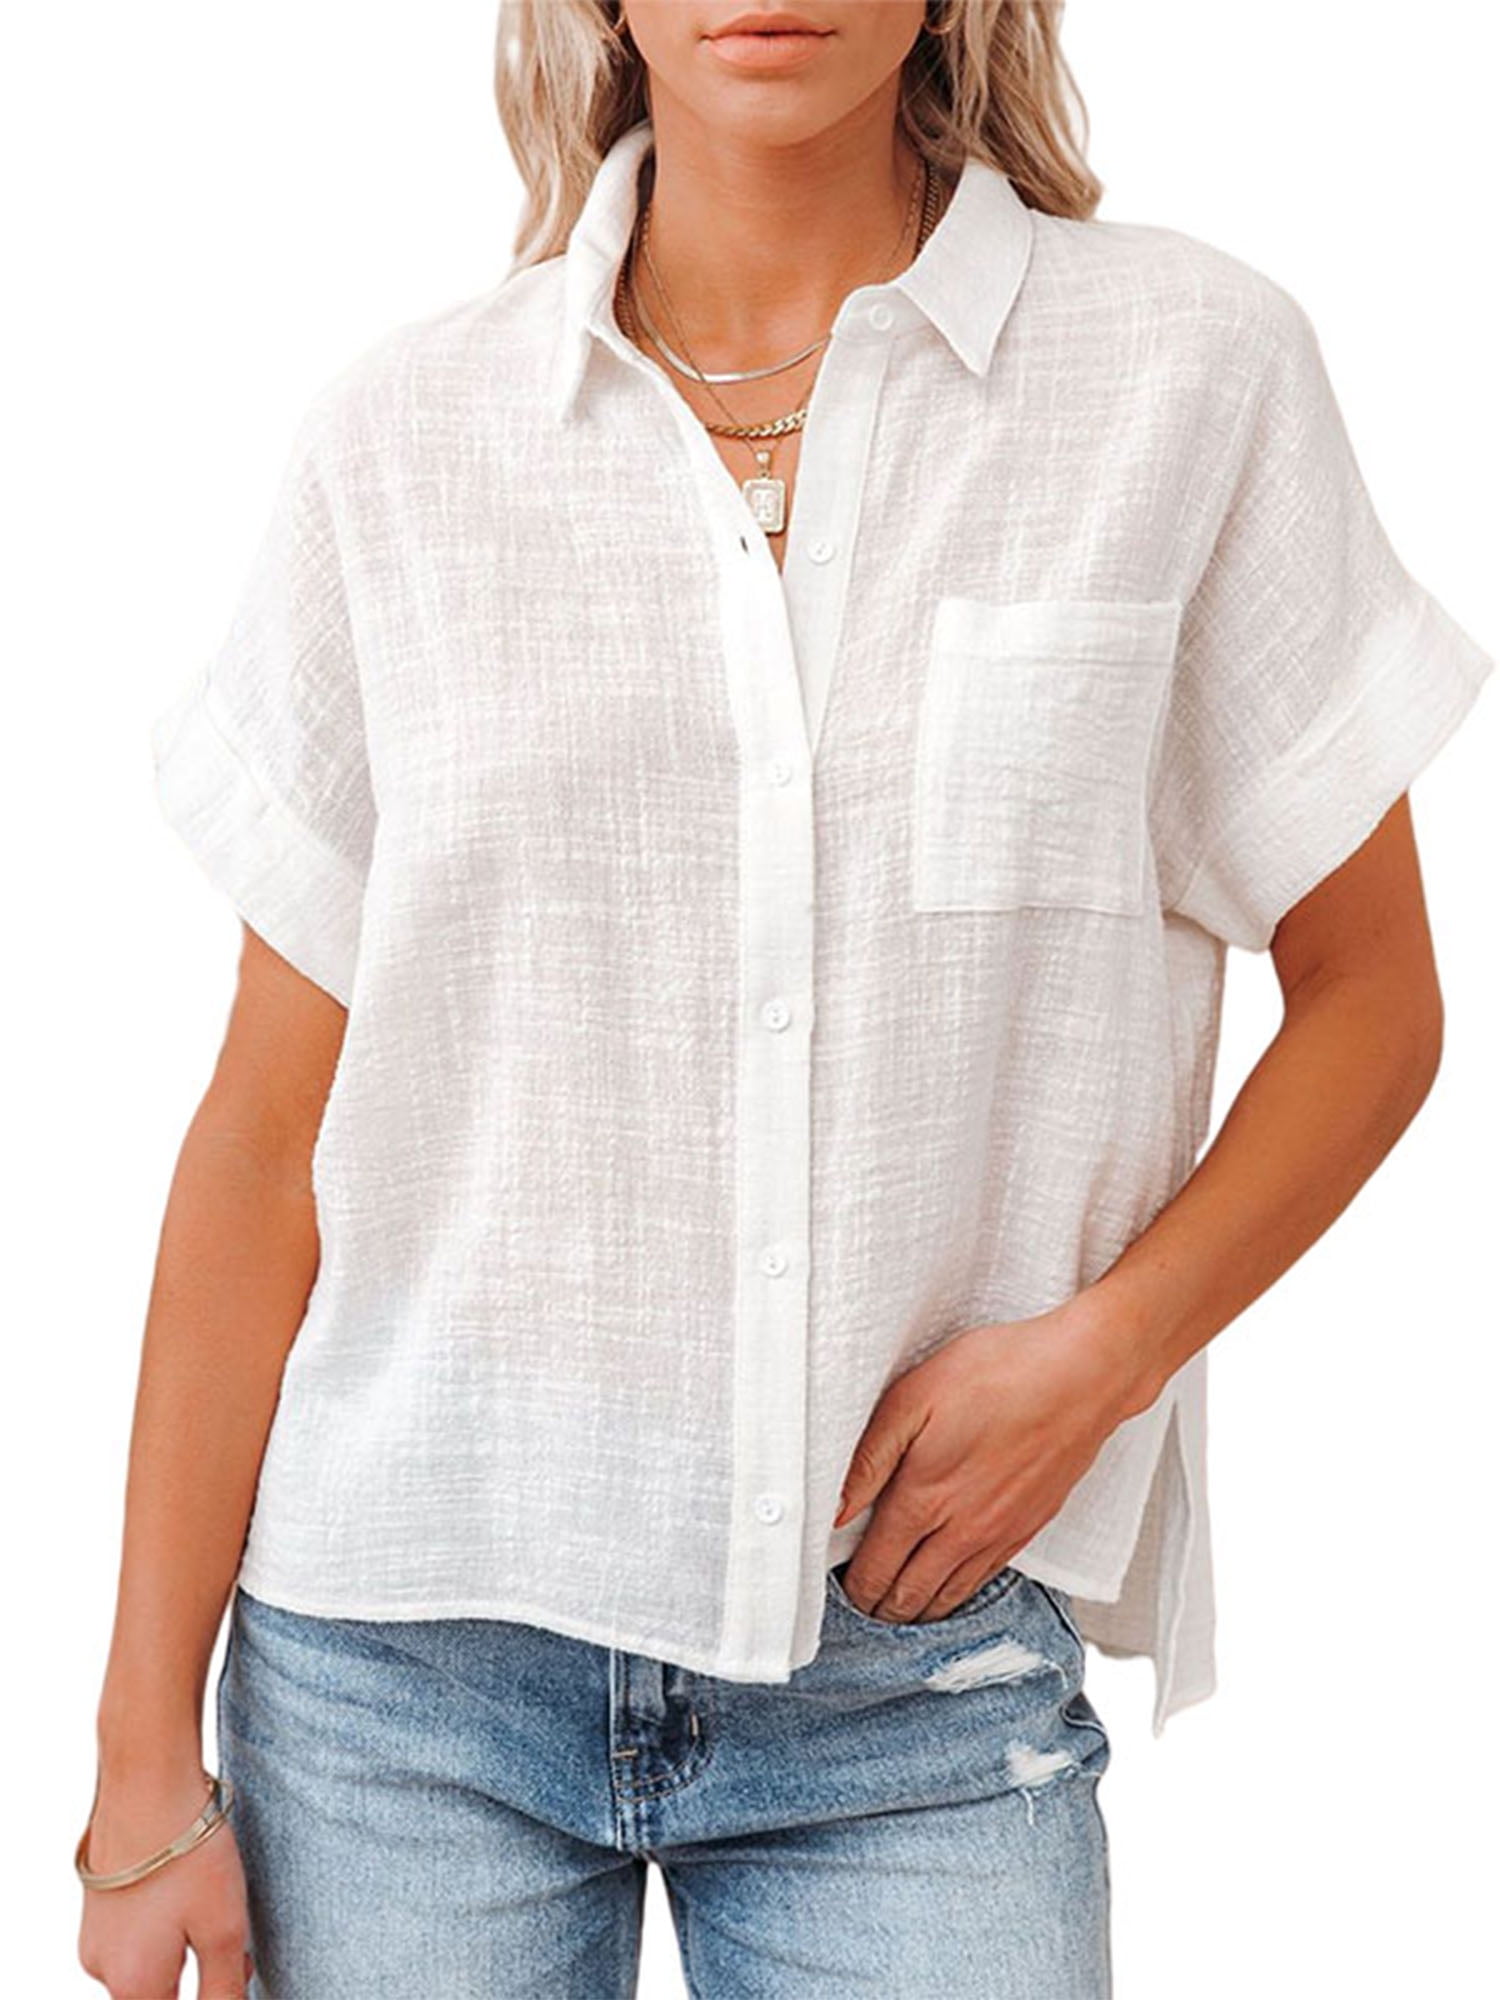 Women Short Sleeve Cotton and Linen Shirts V Neck Collared Button Down Tops  With Pockets